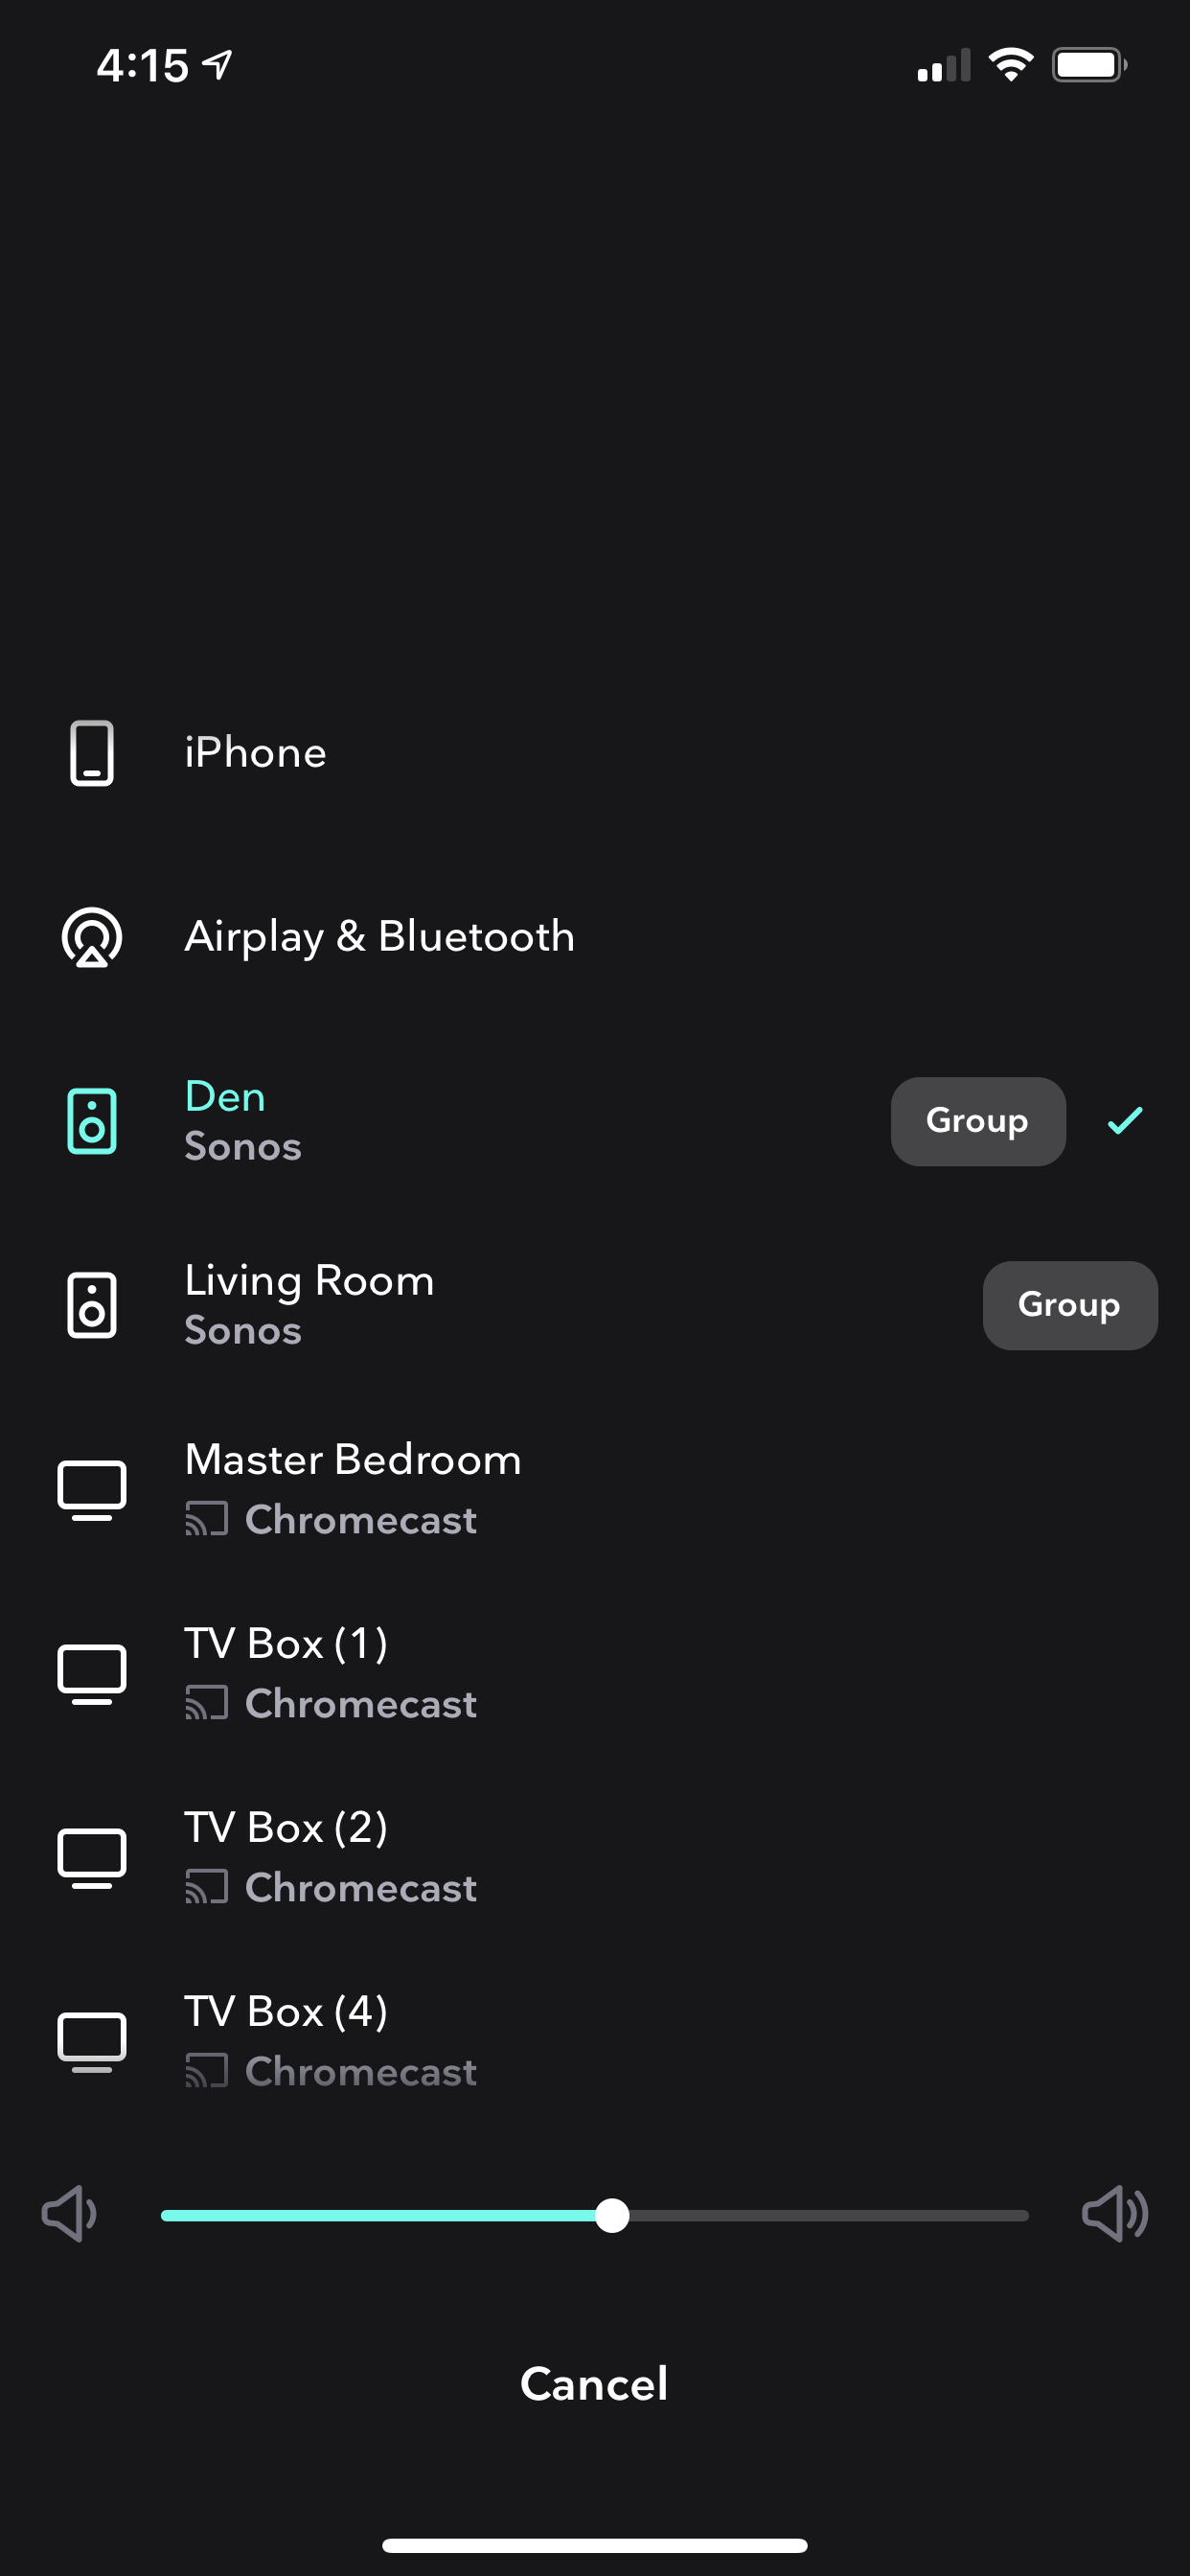 Tidal now displays “MASTER” - does SONOS now support | Sonos Community